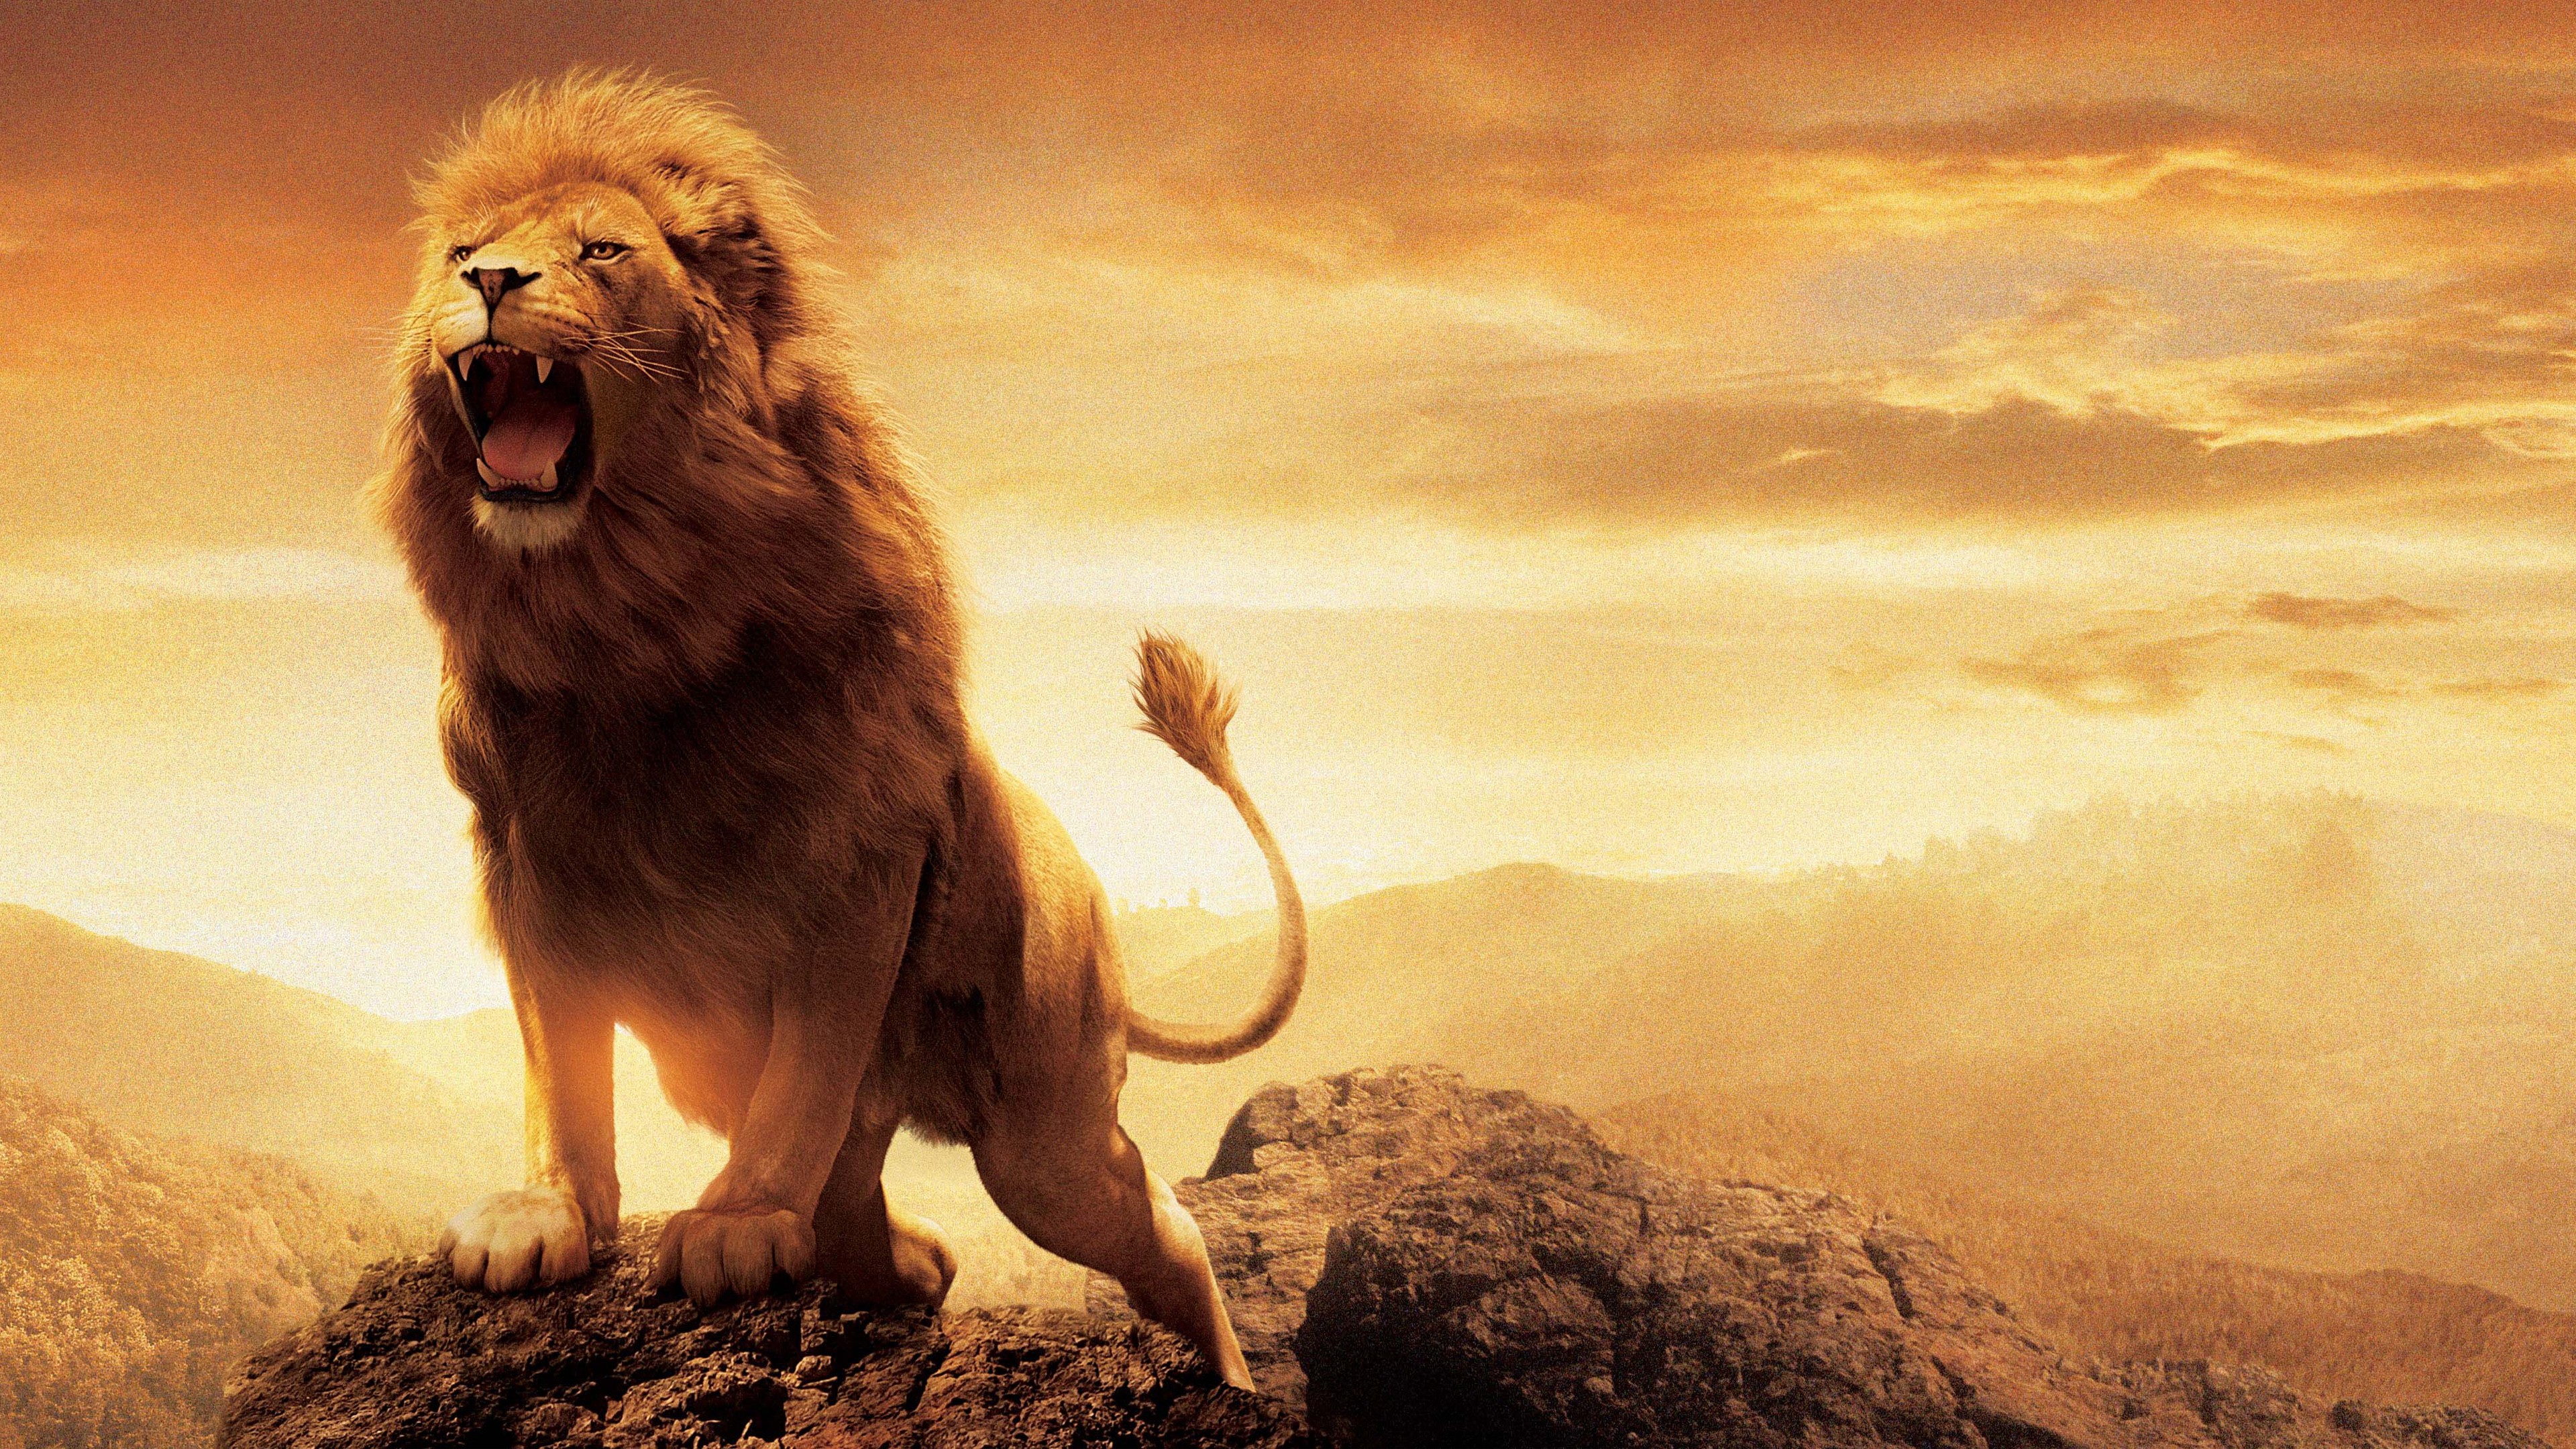 General 3840x2160 nature The Chronicles of Narnia lion bright